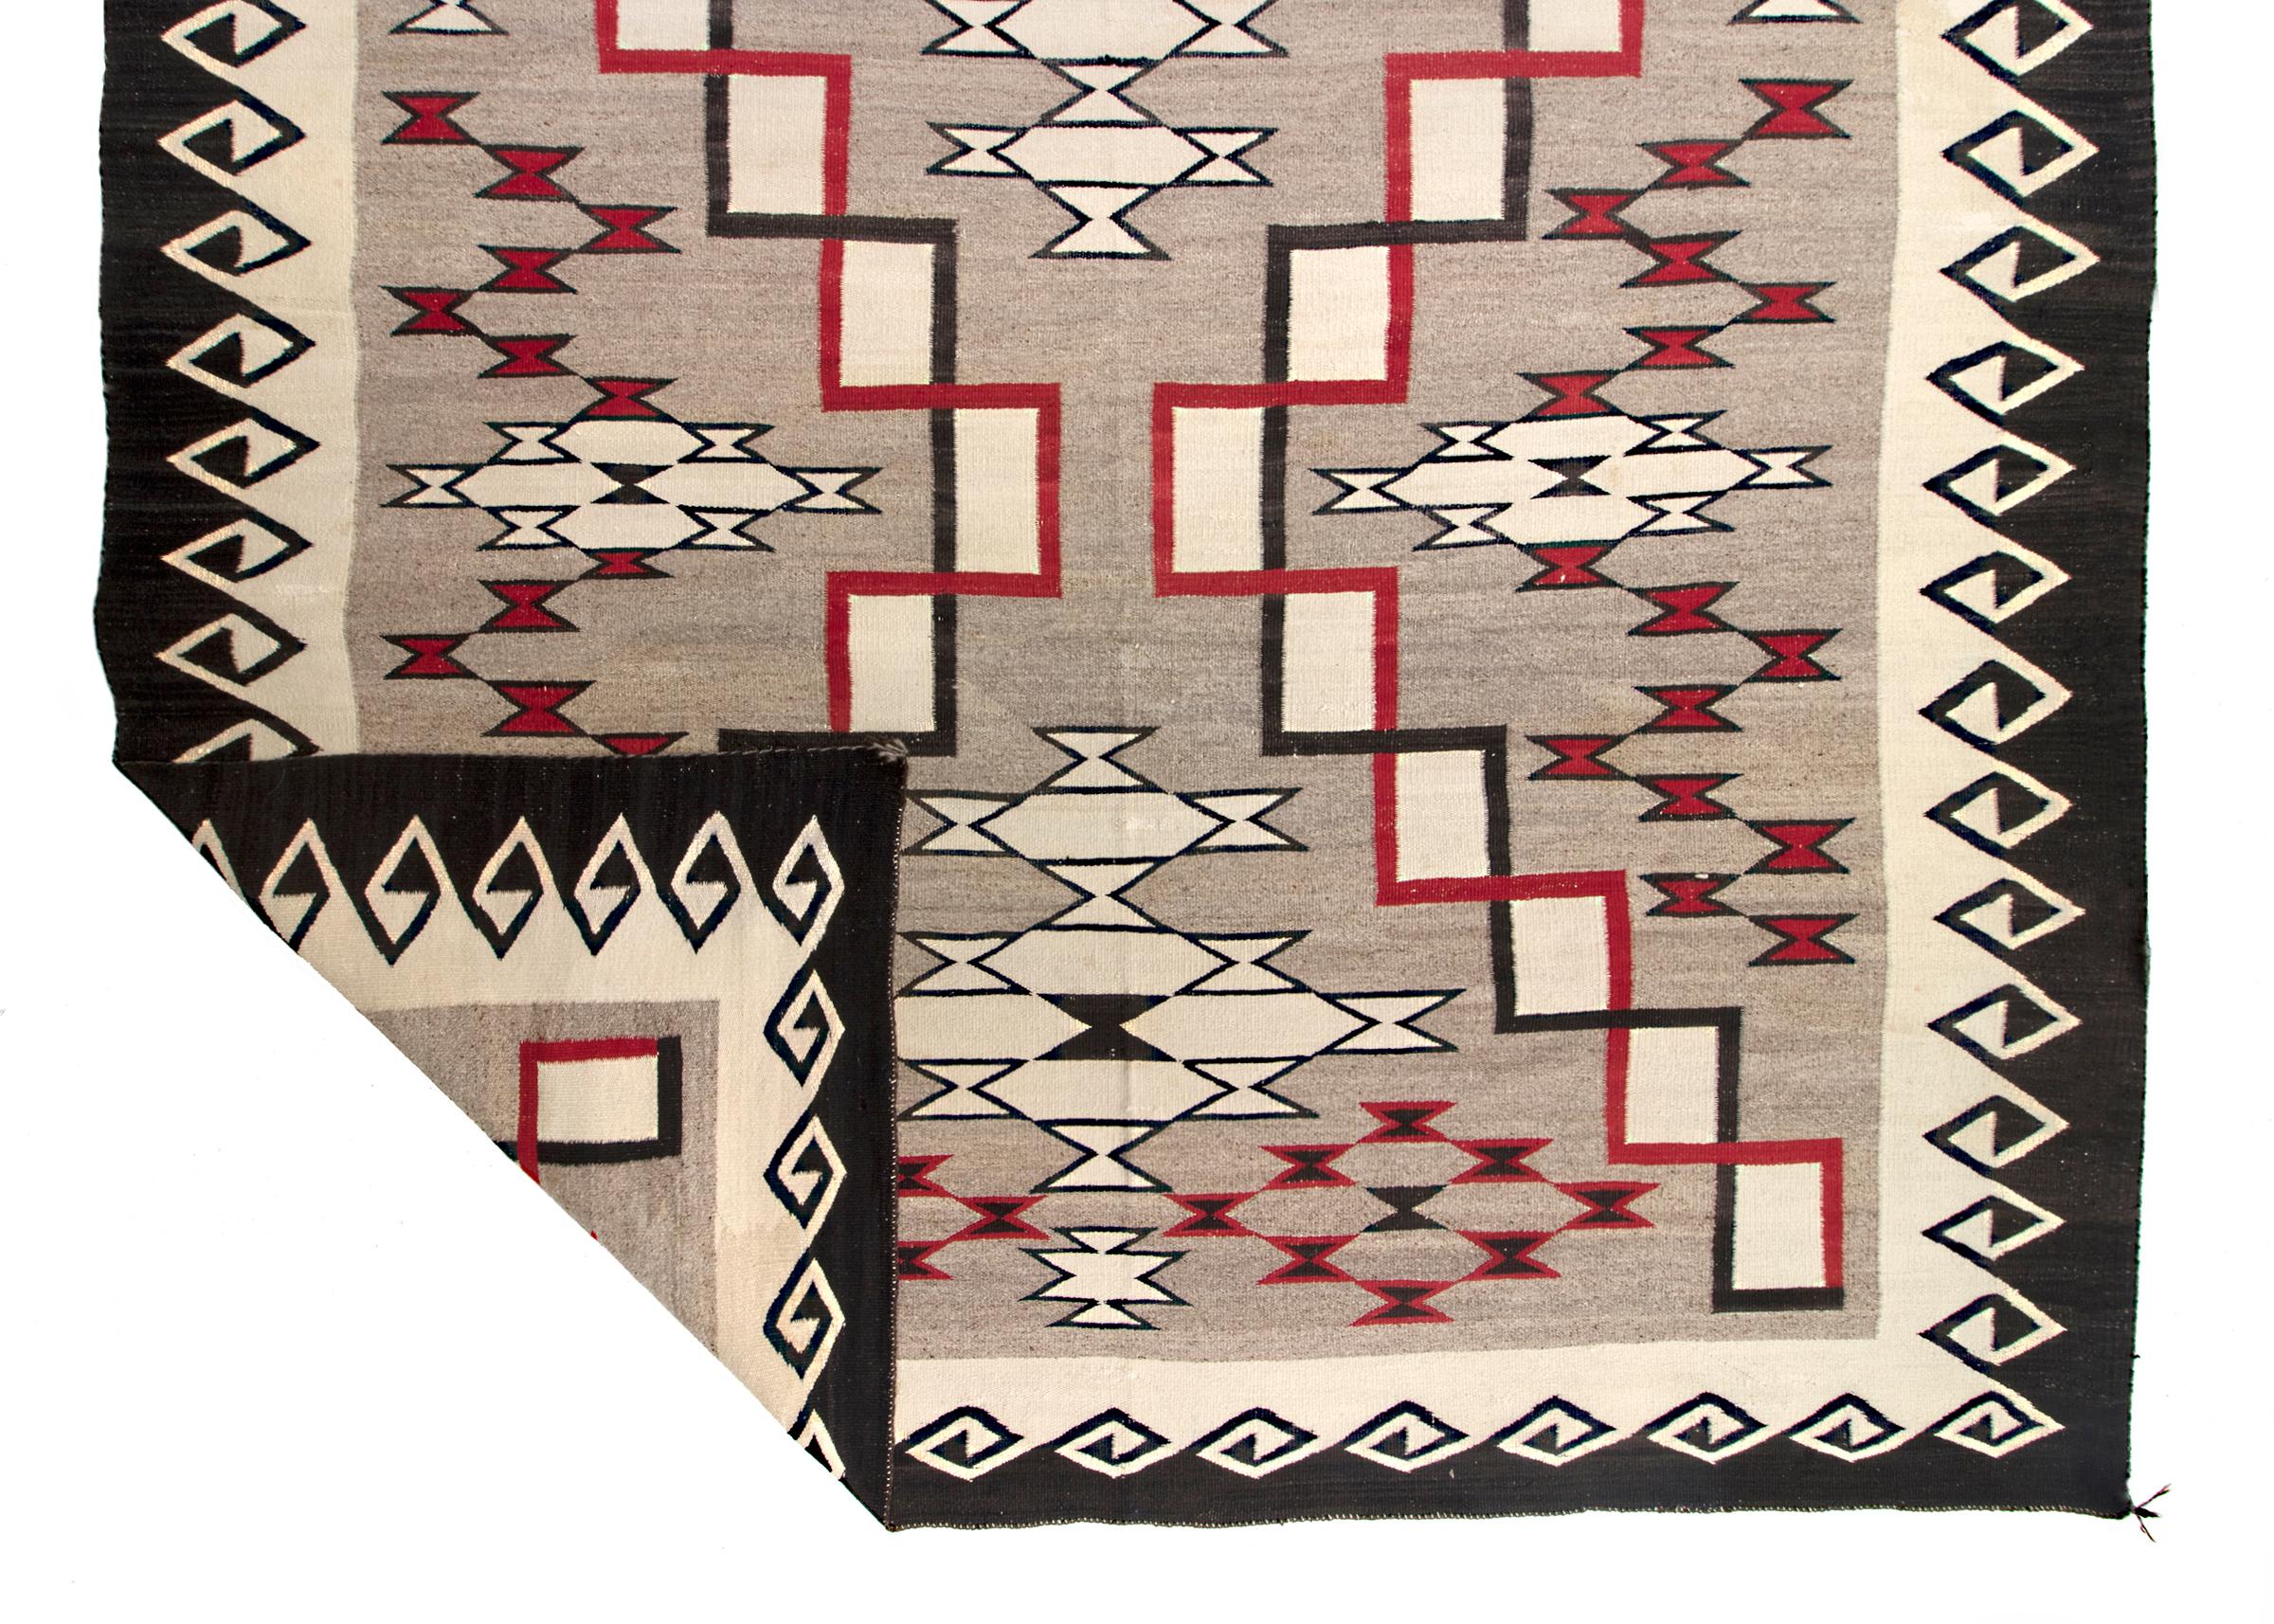 Vintage Southwestern Navajo wool area rug woven at the Ganado Trading Post (founded by John Lorenzo Hubbell at Ganado, Arizona, in 1876), circa 1900-1925. Woven of native handspun wool in natural fleece colors of gray, ivory/white and brown/black